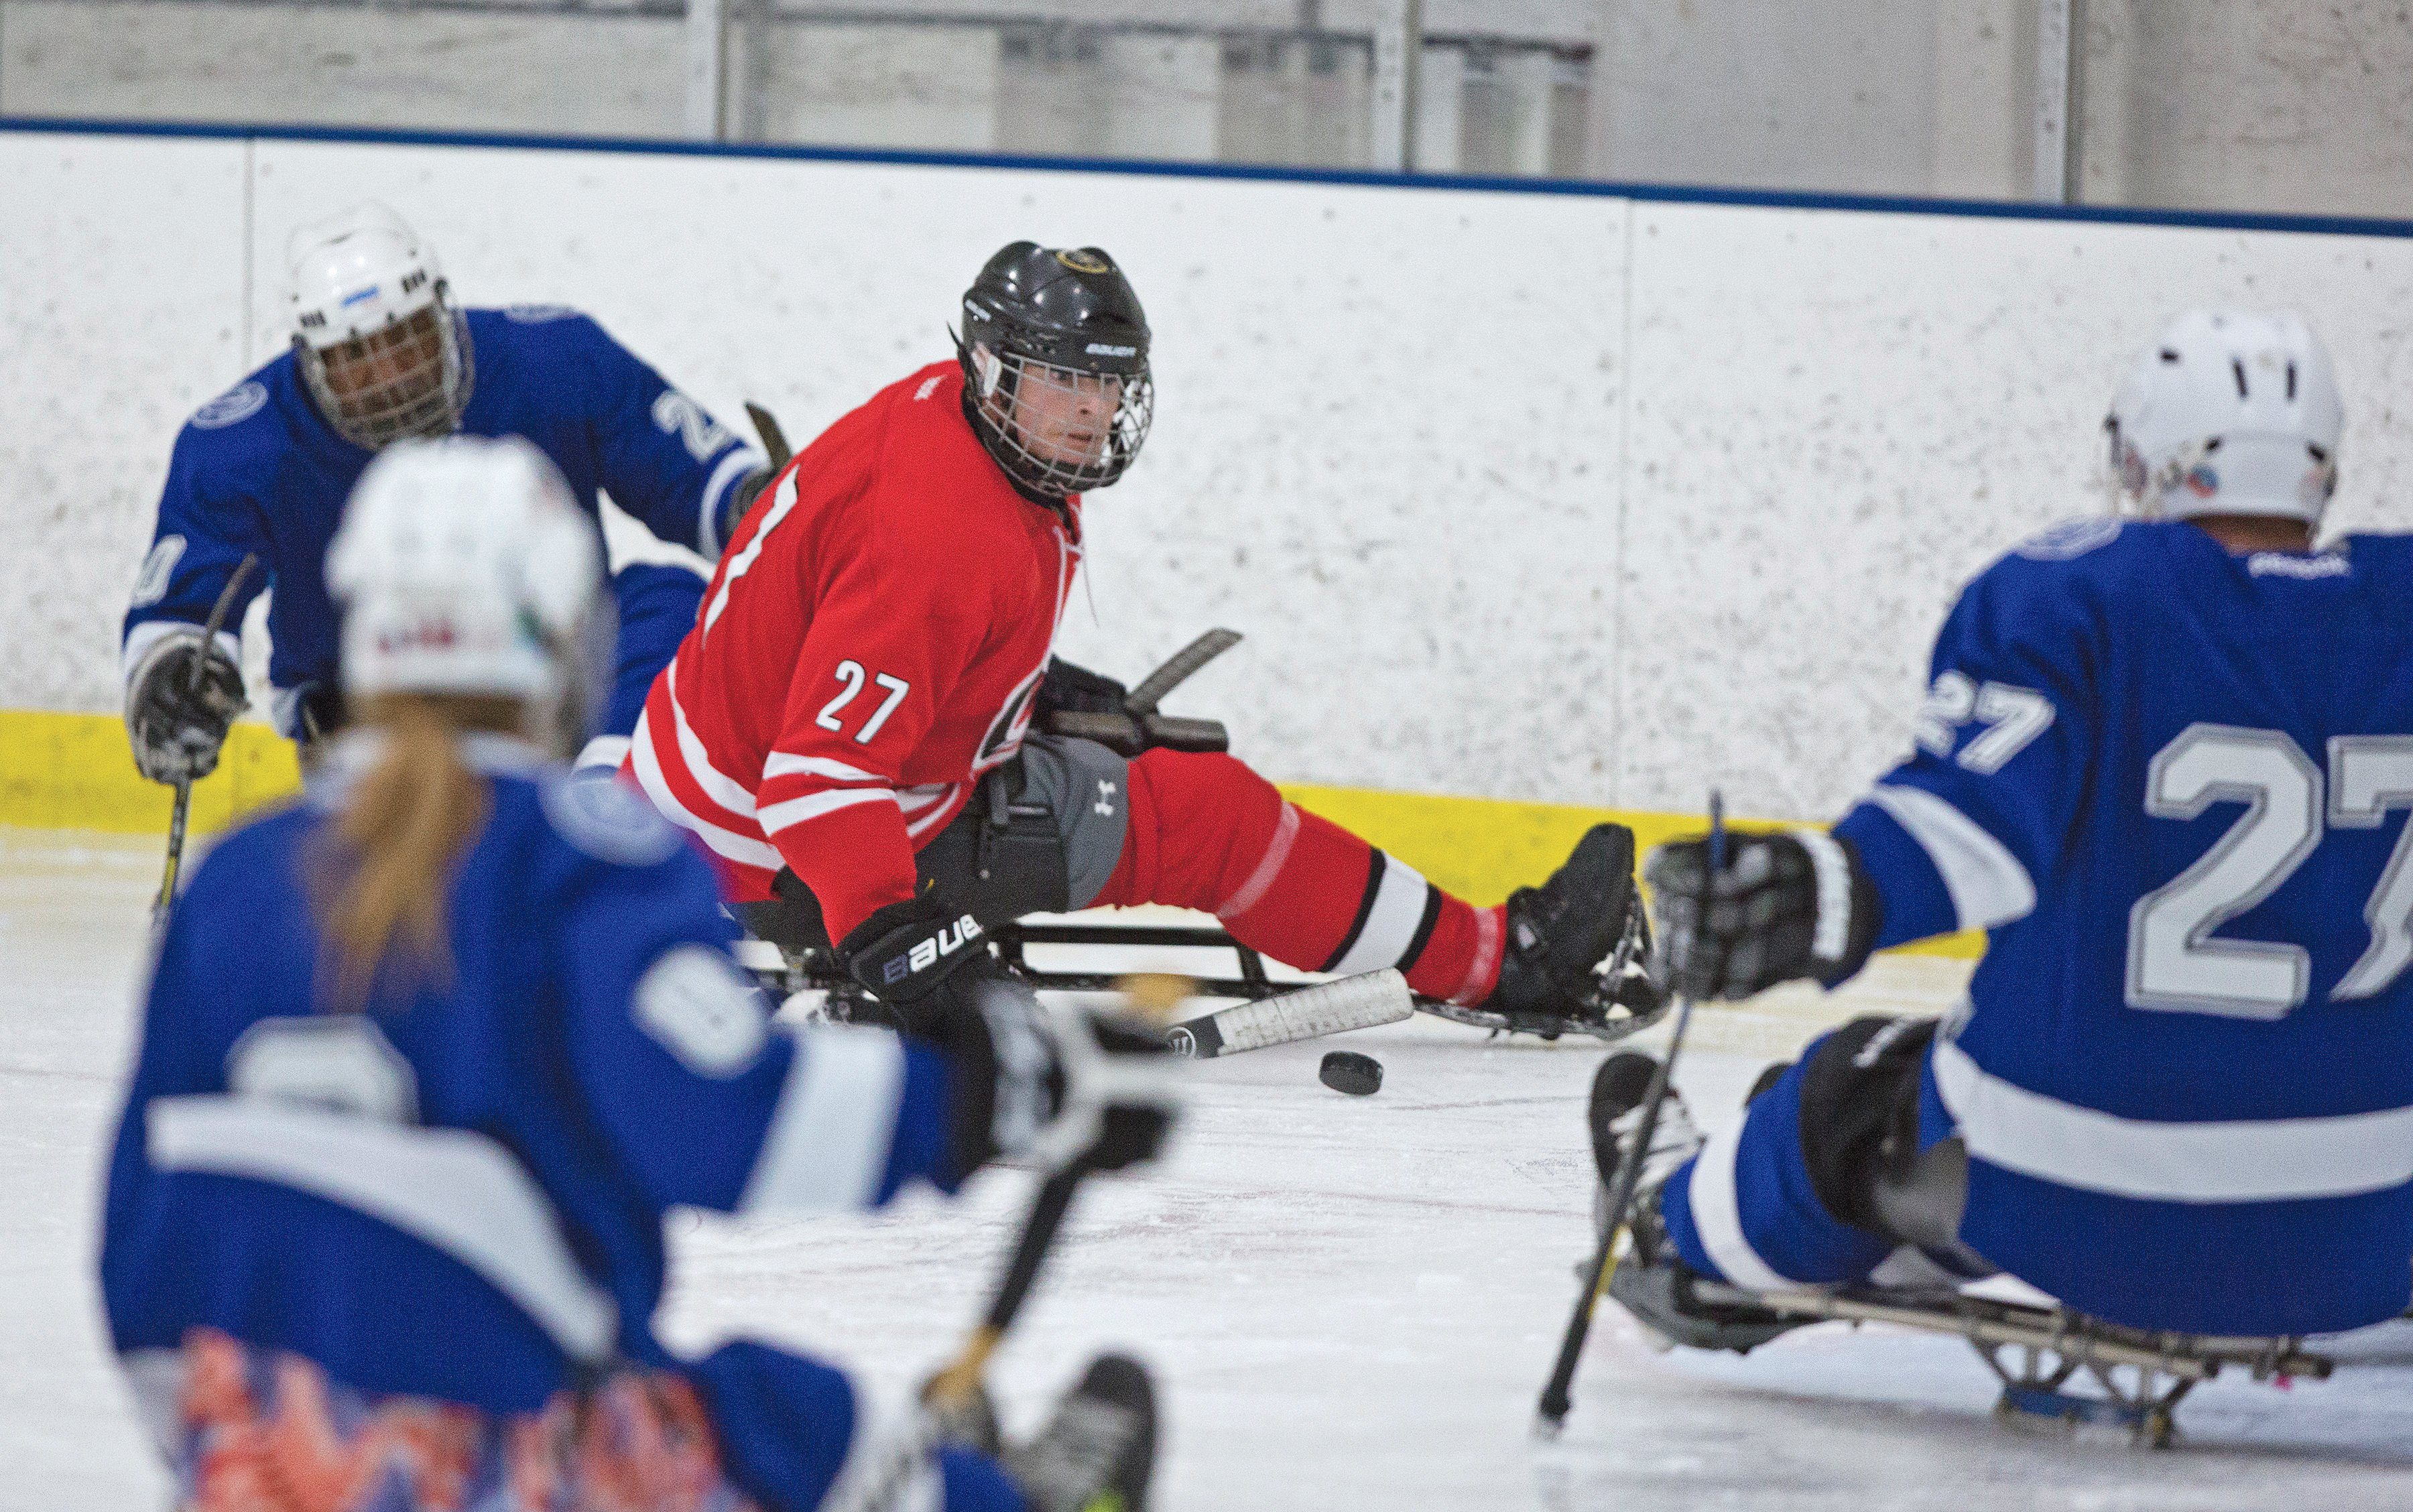 Sled Hockey for Players With Mobility Impairments